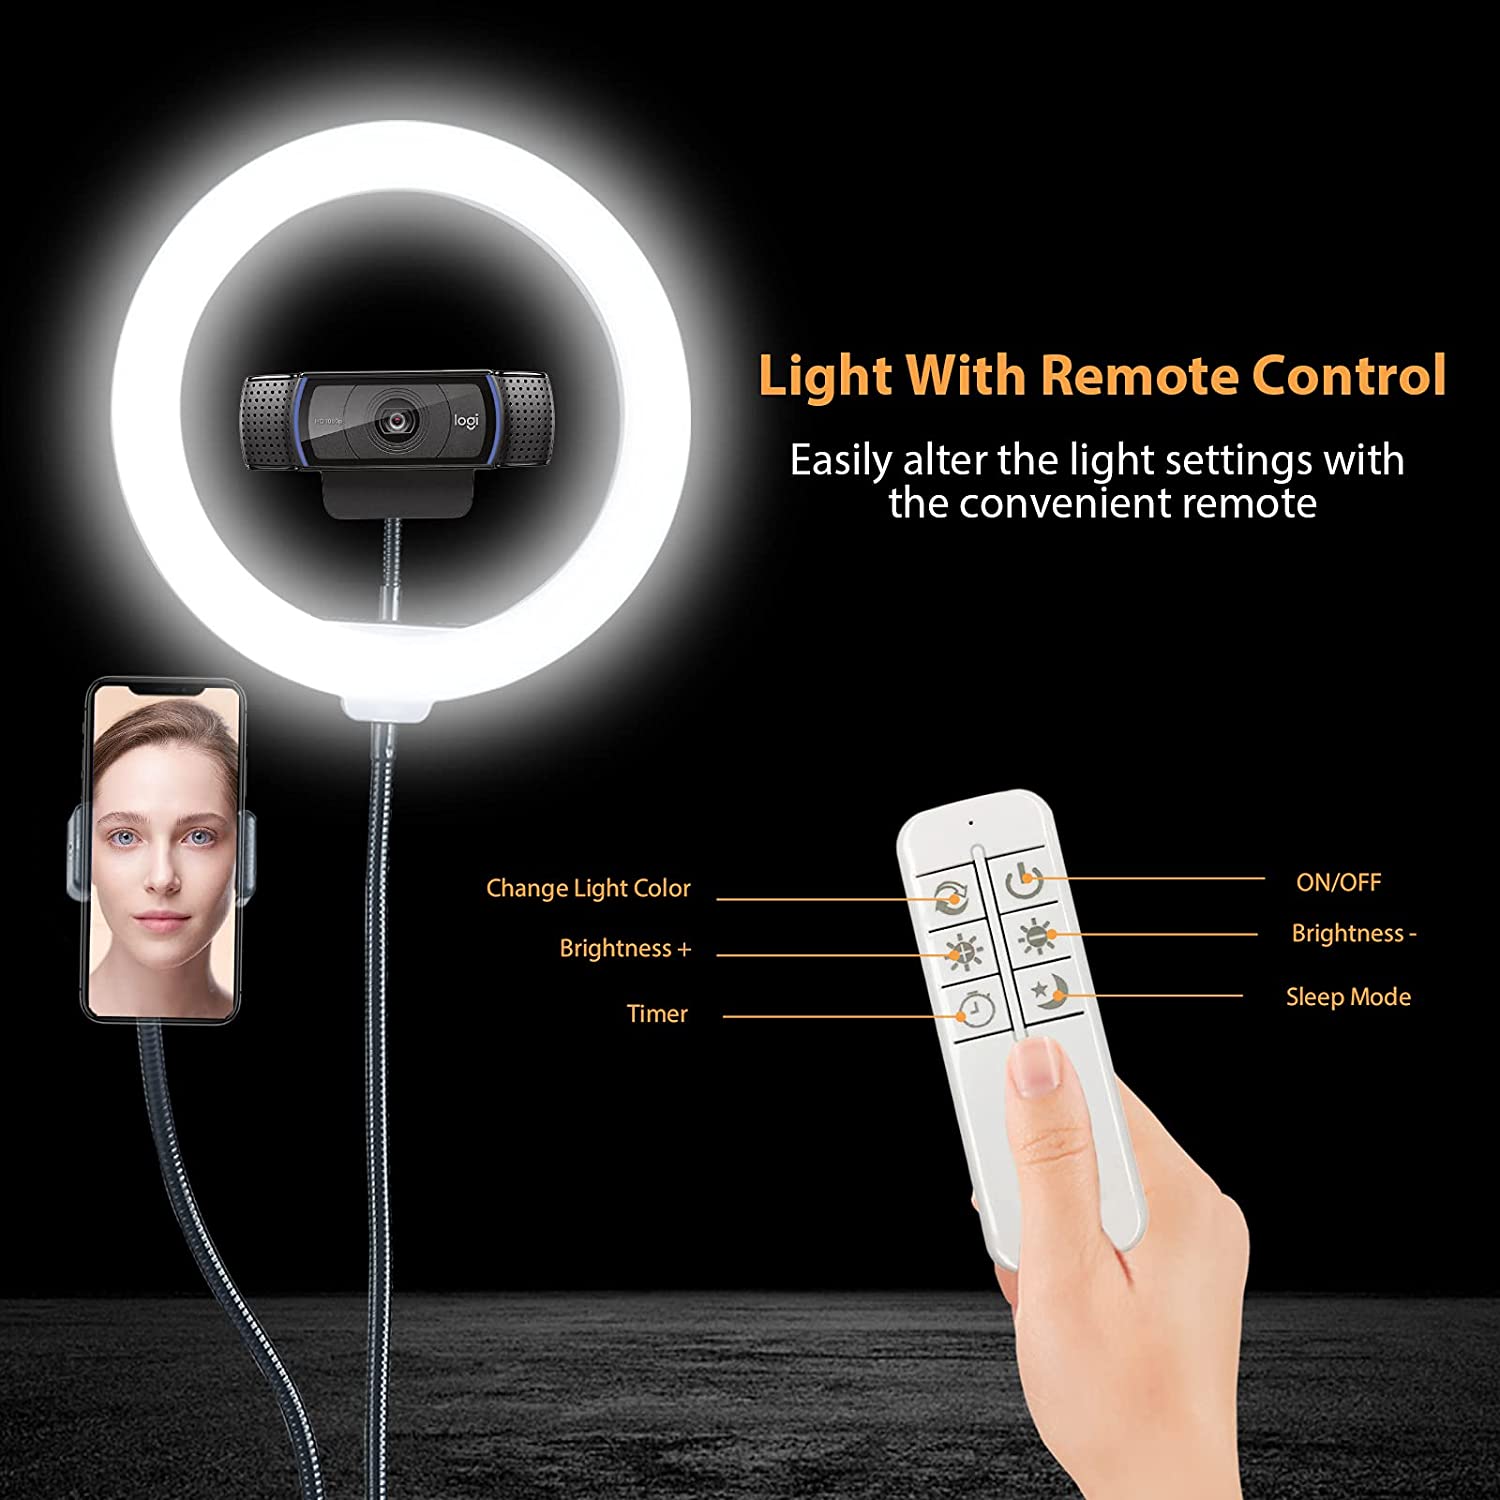 Adjust the brightness of the ring light using the remote control.